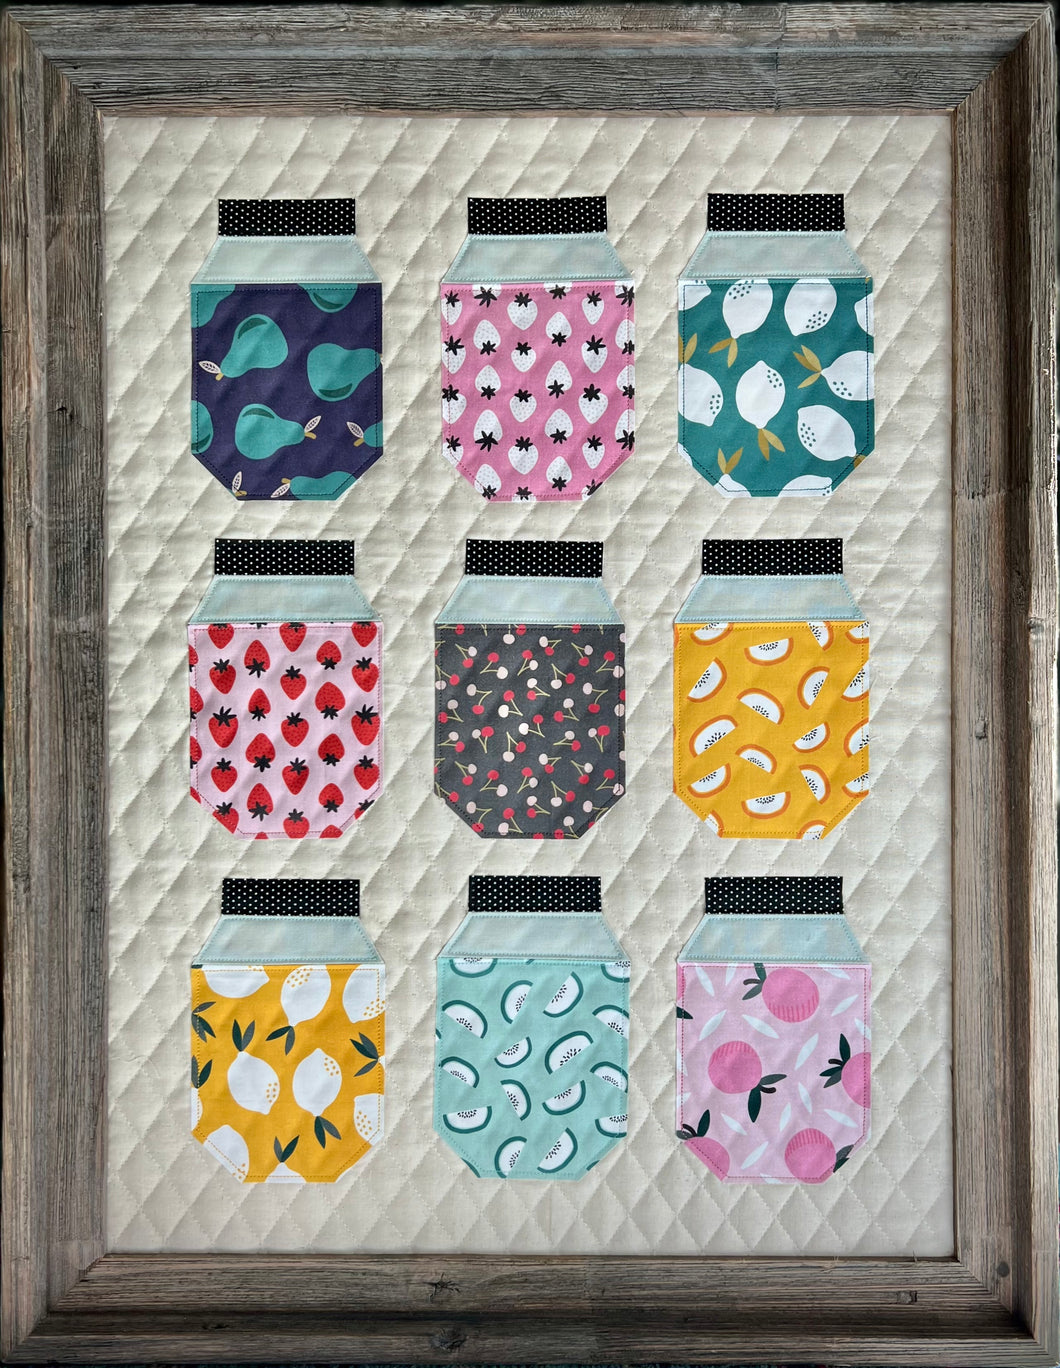 Canning is My Jam Digital Pattern - Quilted Wall Art